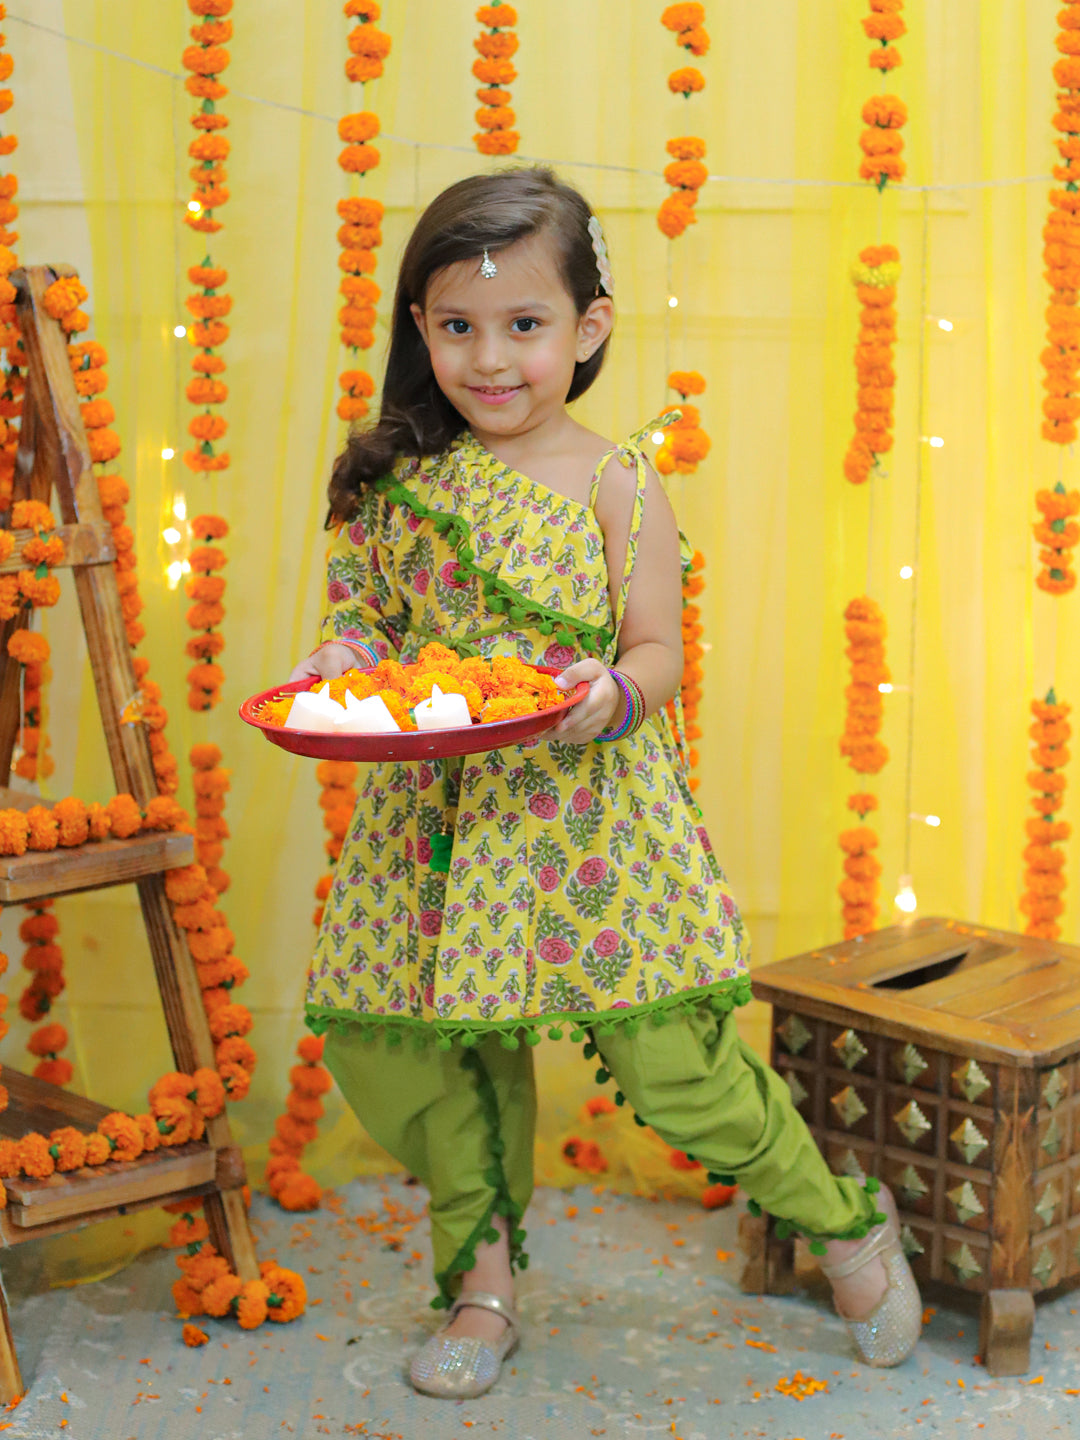 BownBee Girls  Pure Cotton Printed One Sleeve Ruffle Kurti with Dhoti- Indo Western Clothing Sets Yellow